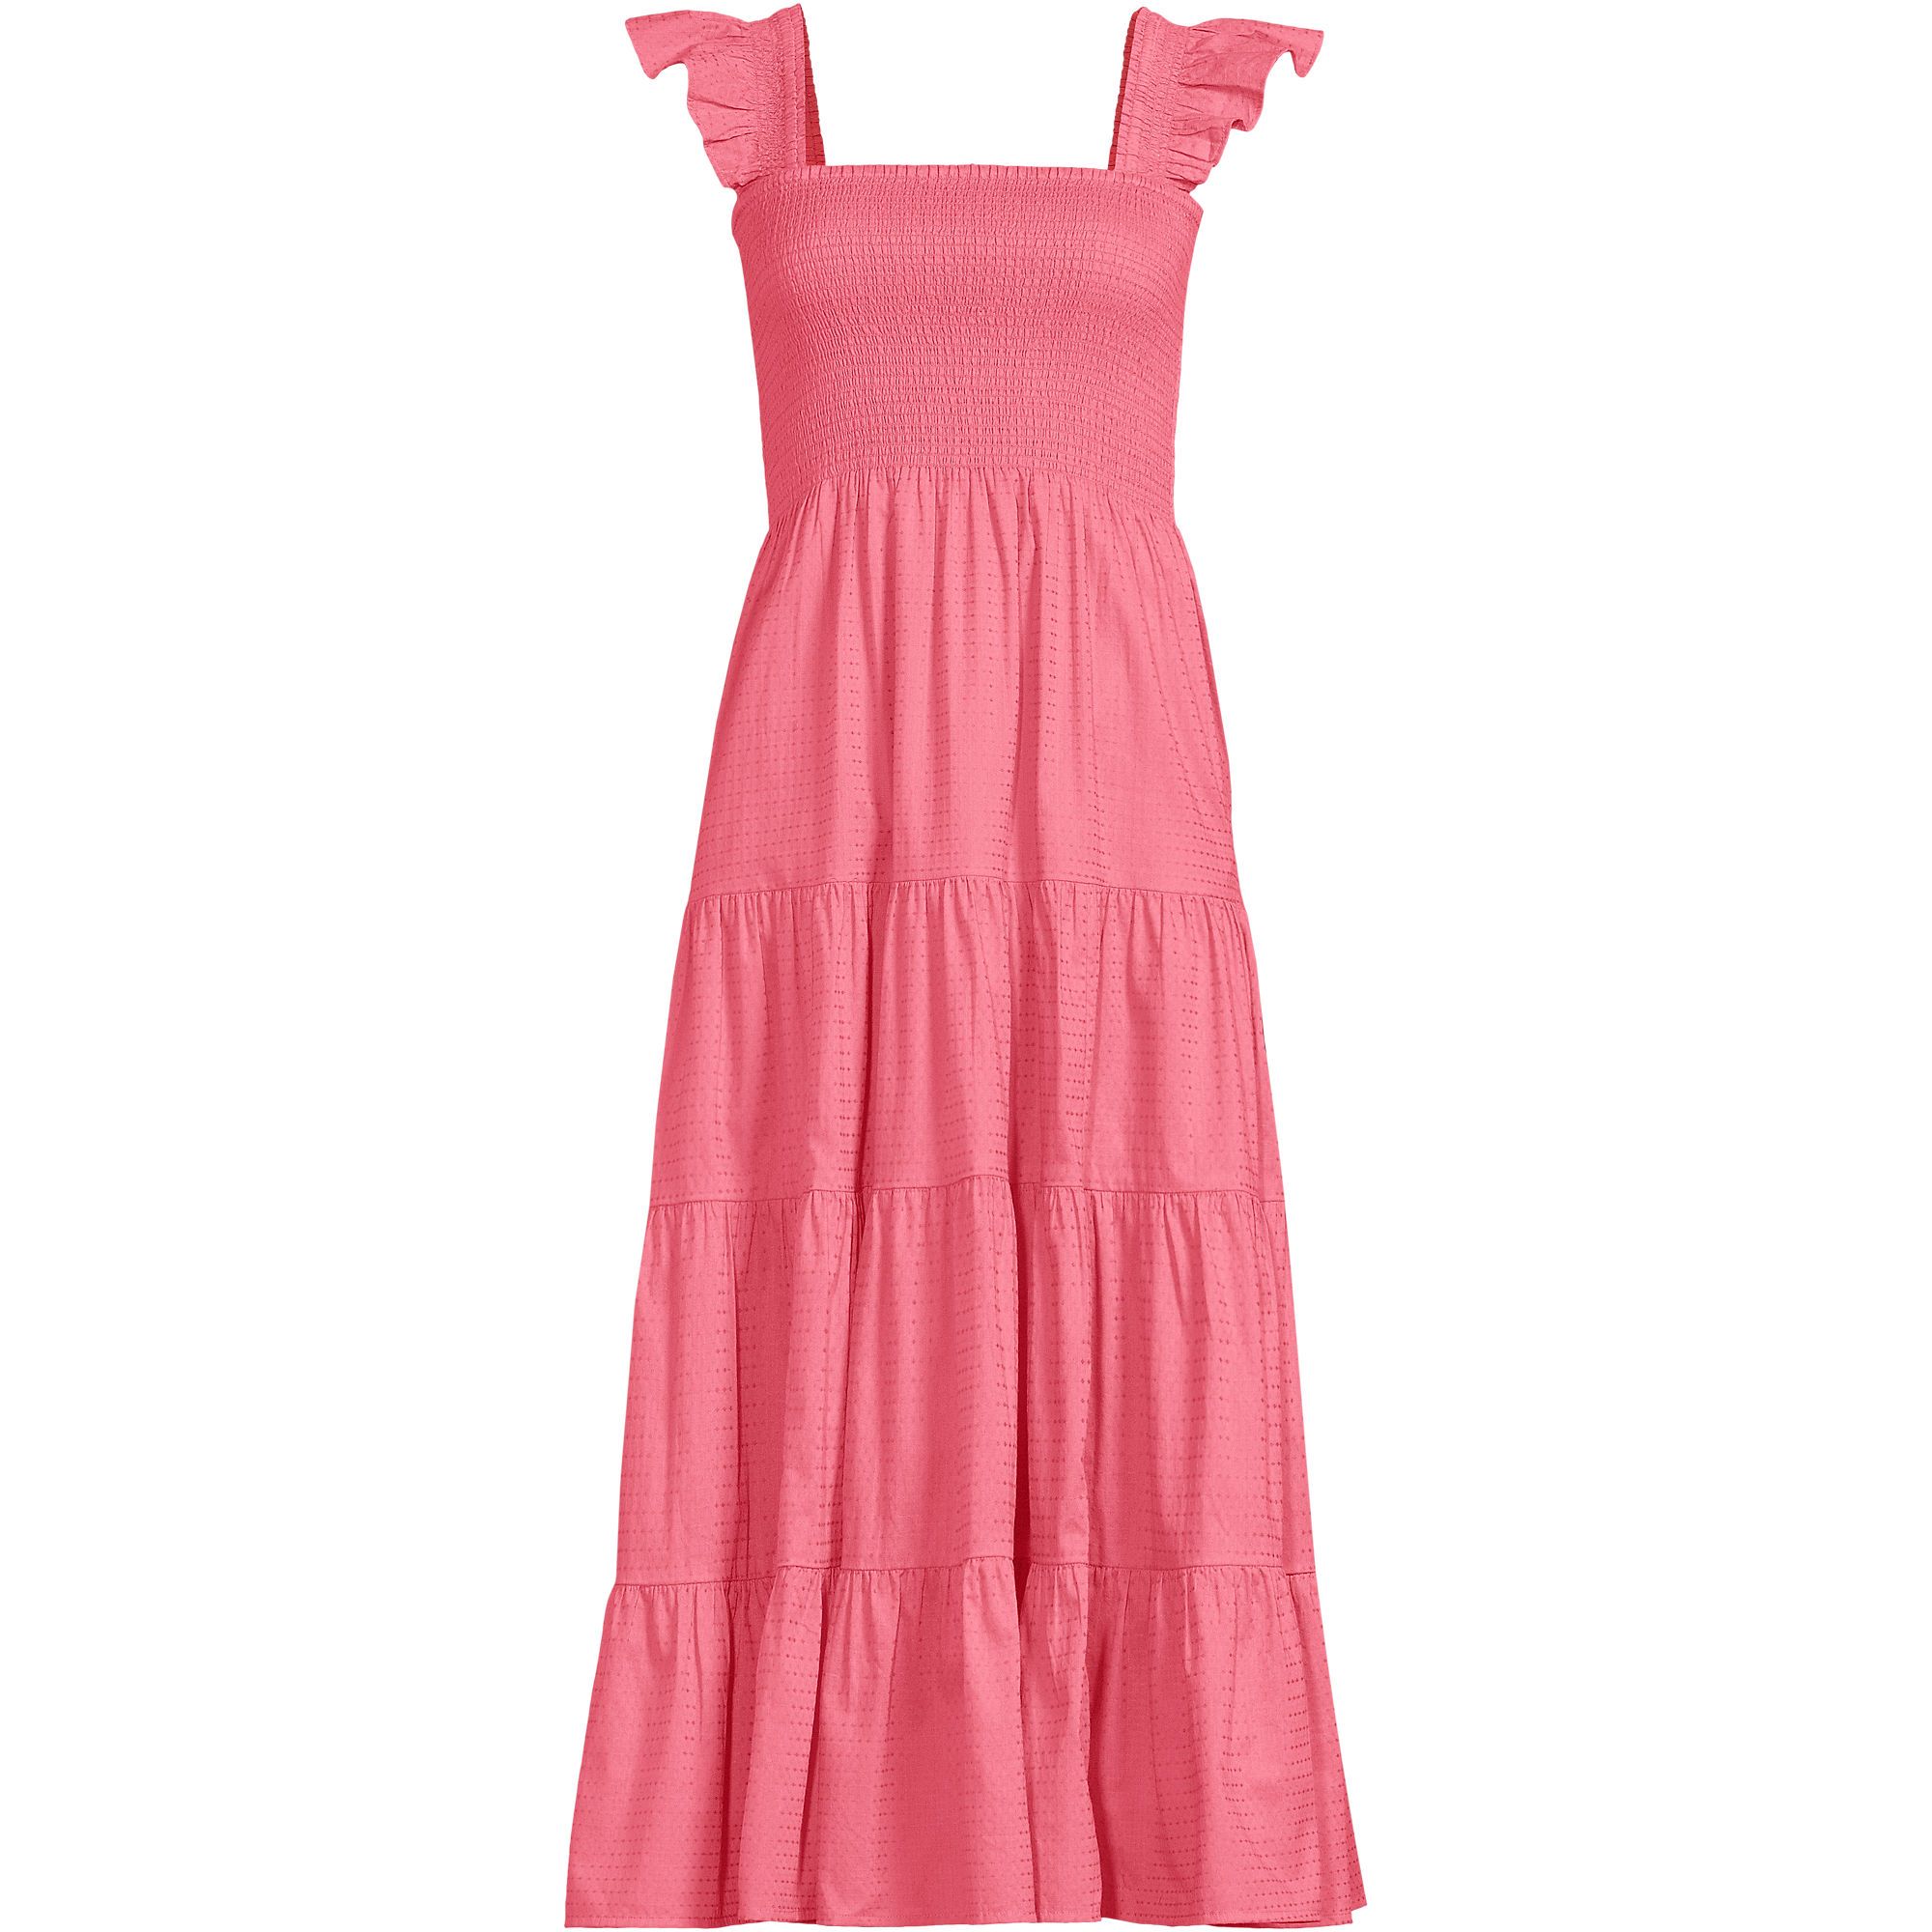 Women's Cotton Dobby Smocked Dress with Ruffle Straps | Lands' End (US)